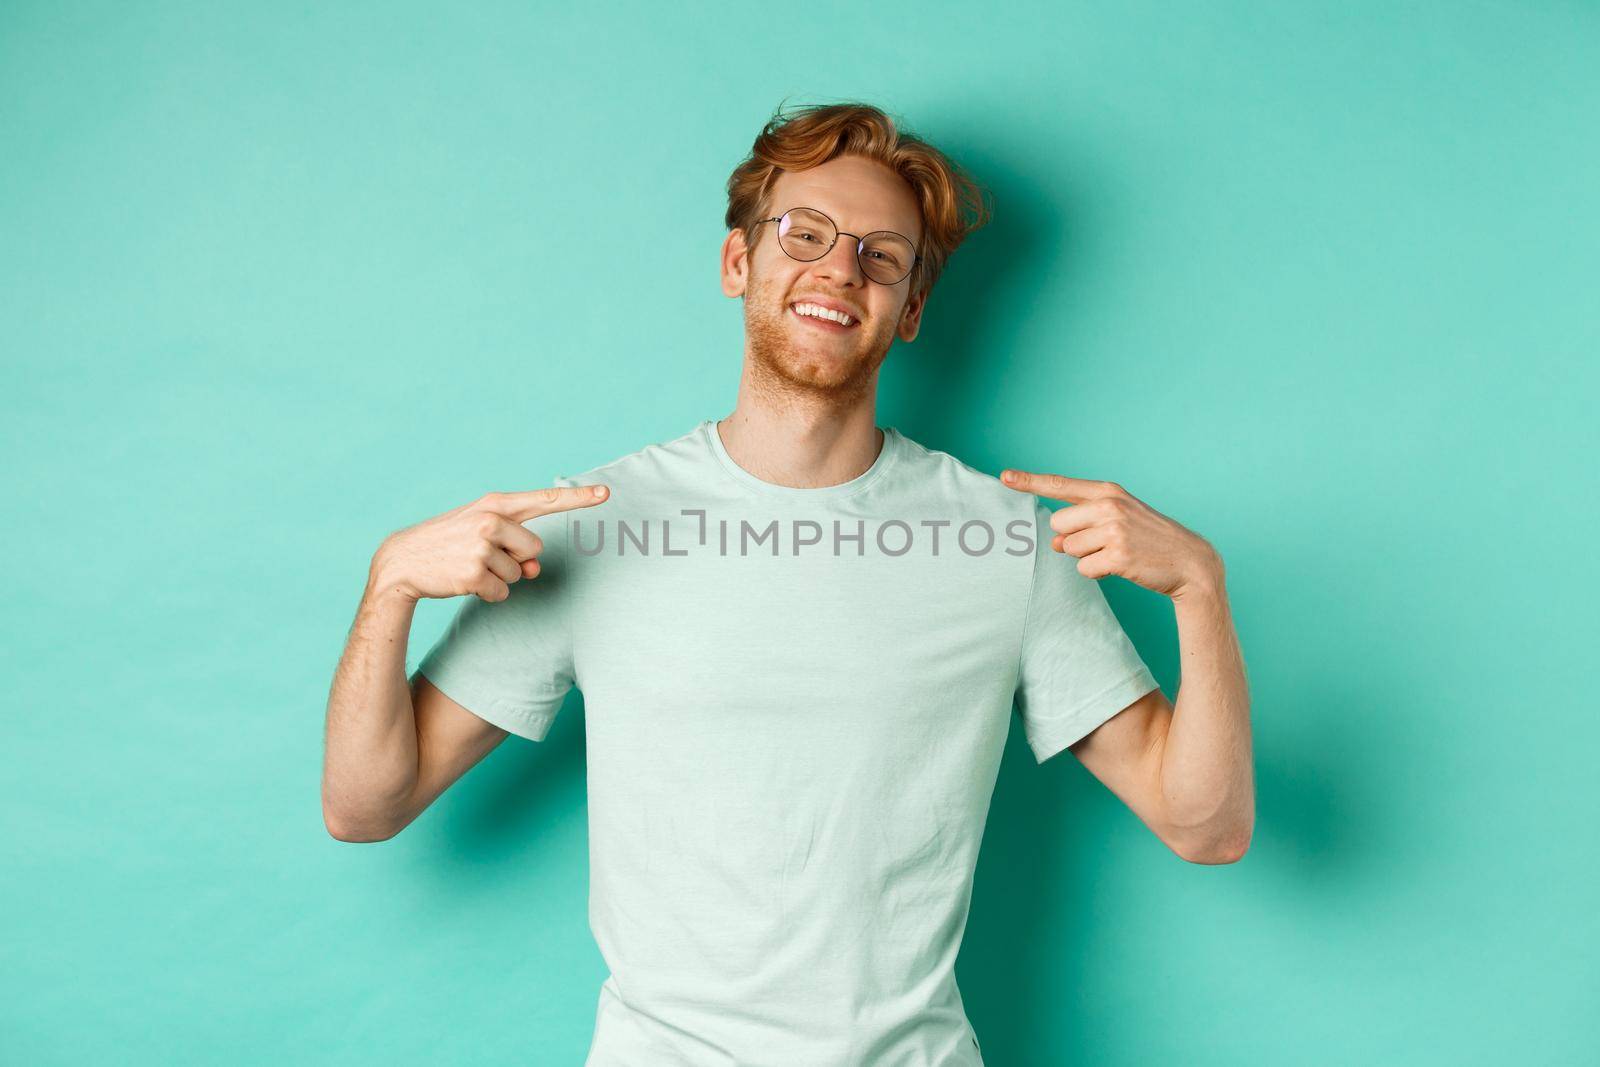 Confident redhead man in glasses and t-shirt, smiling with smug face and pointing at himself, bragging while standing over turquoise background.